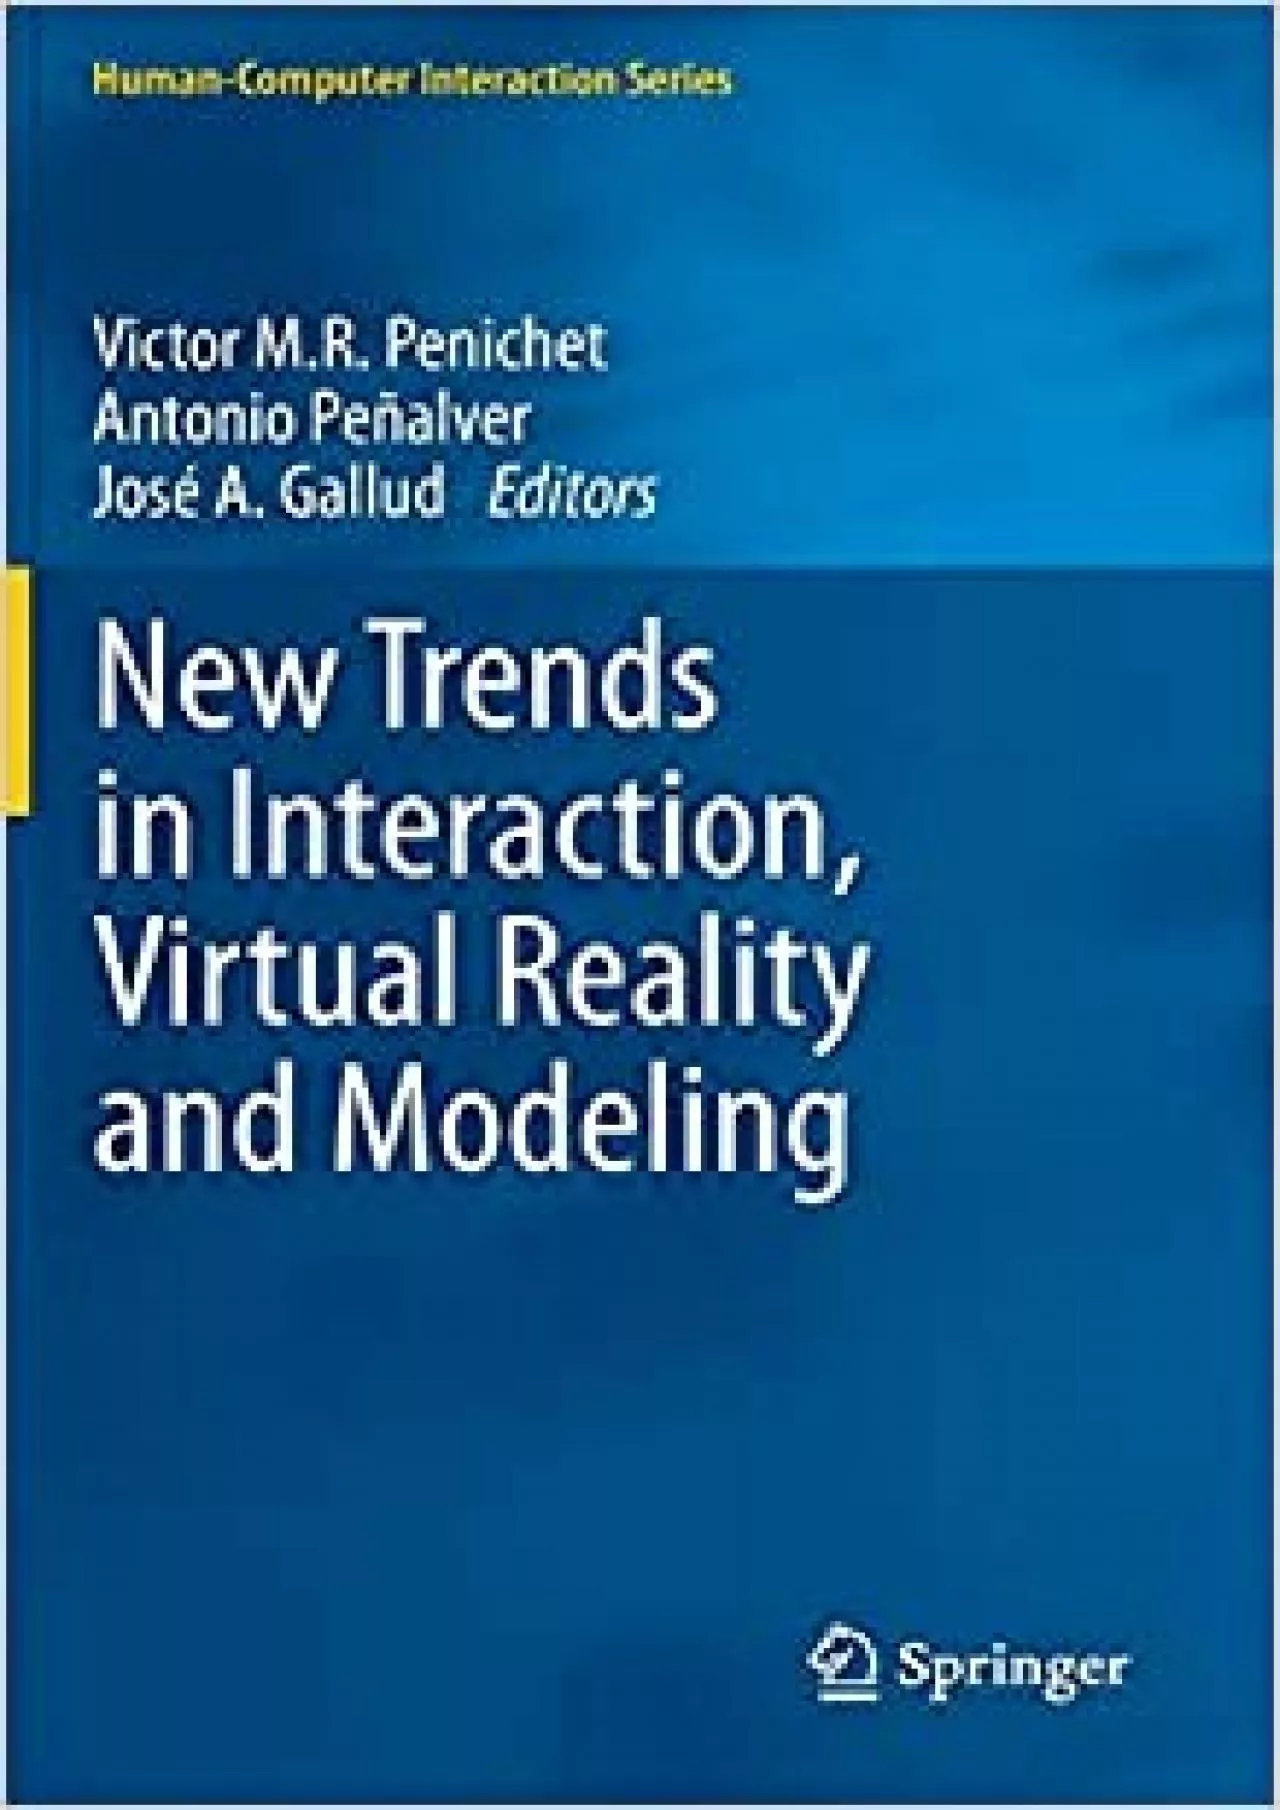 (BOOK)-New Trends in Interaction Virtual Reality and Modeling (Human–Computer Interaction